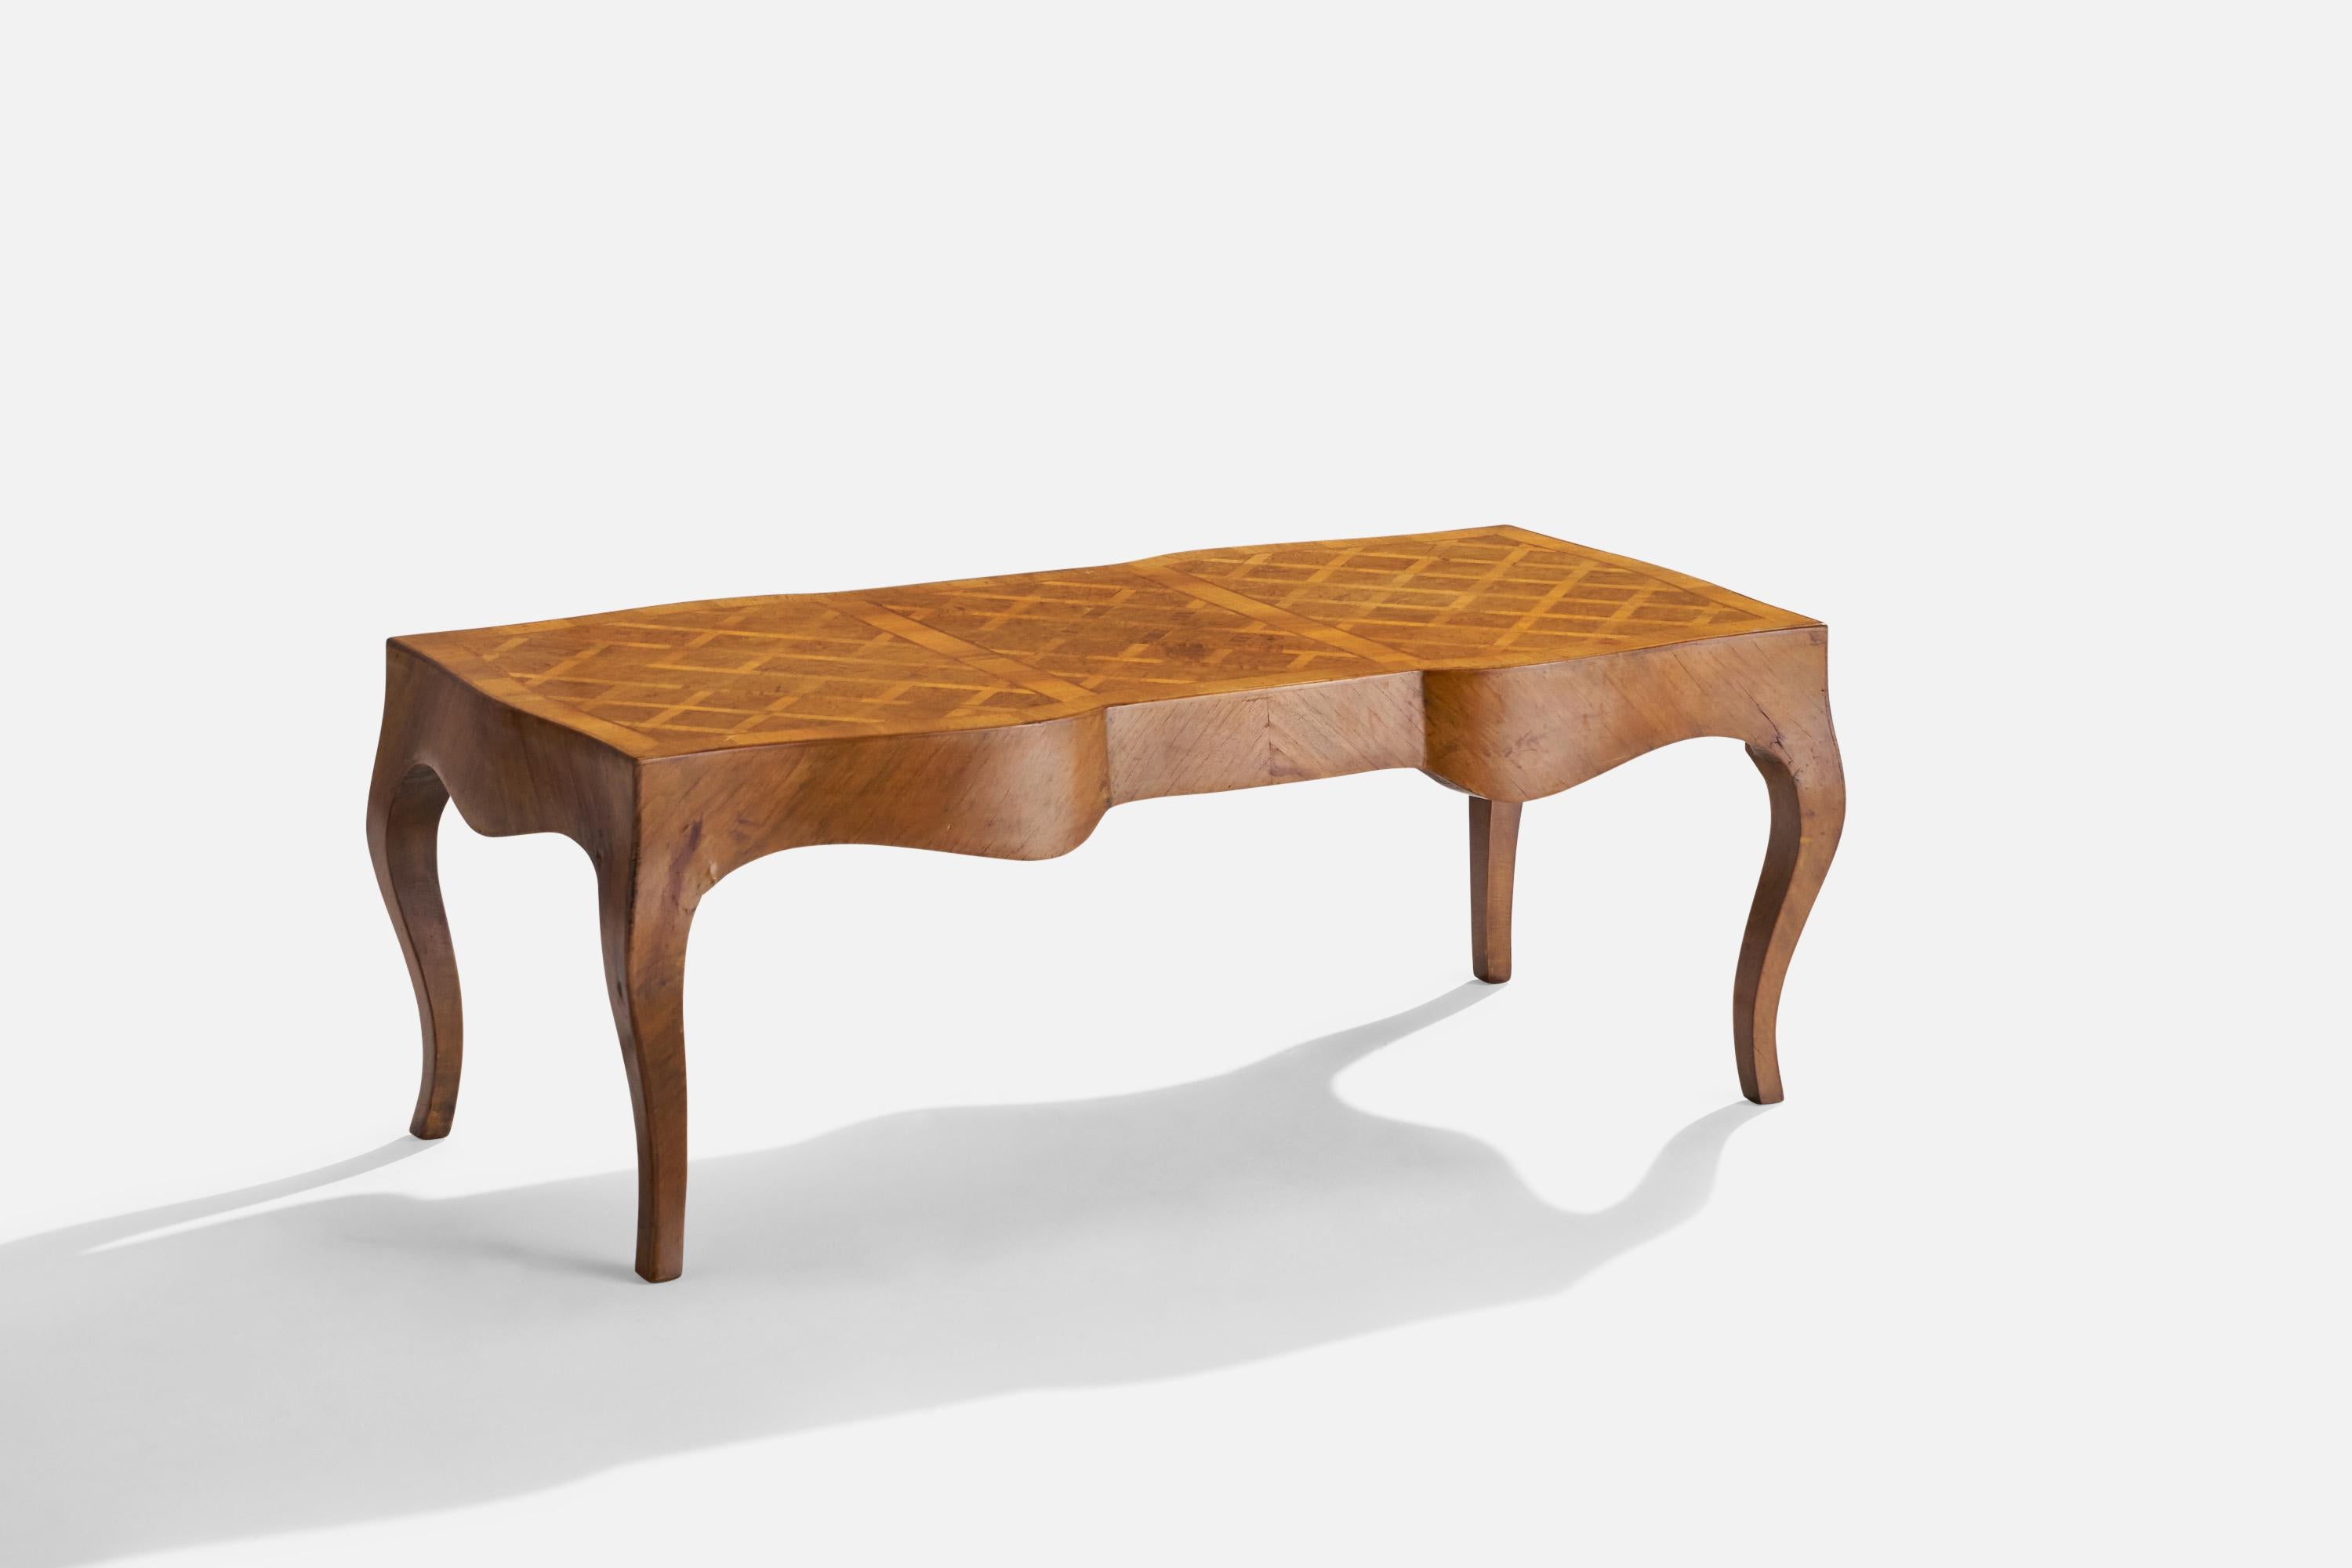 A walnut coffee table designed and produced in Italy, c. 1940s.